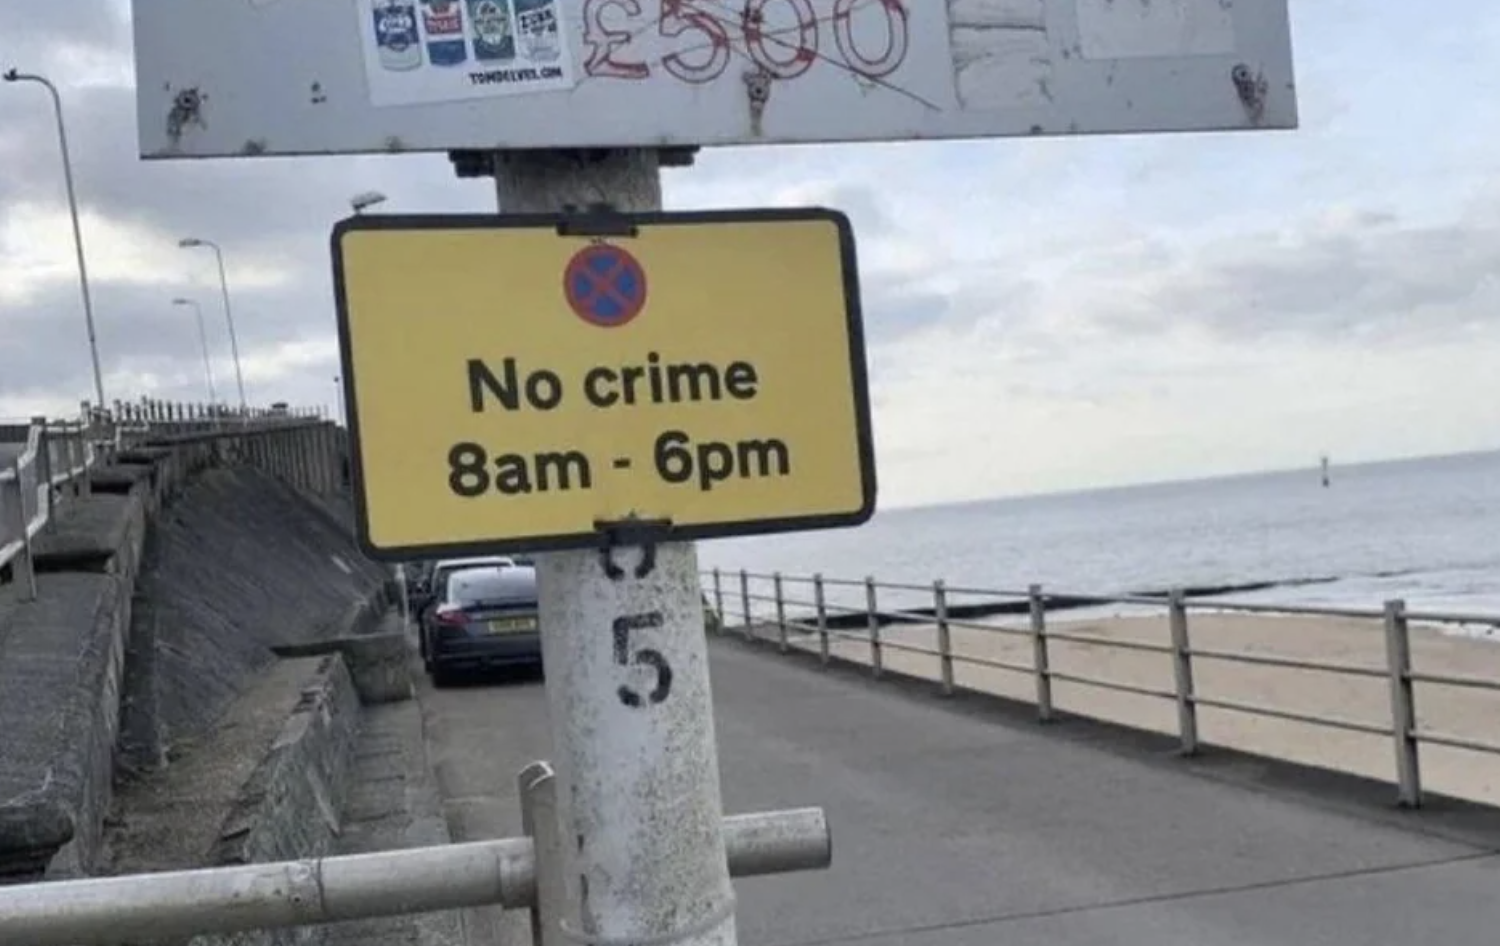 no crime 8am to 6pm